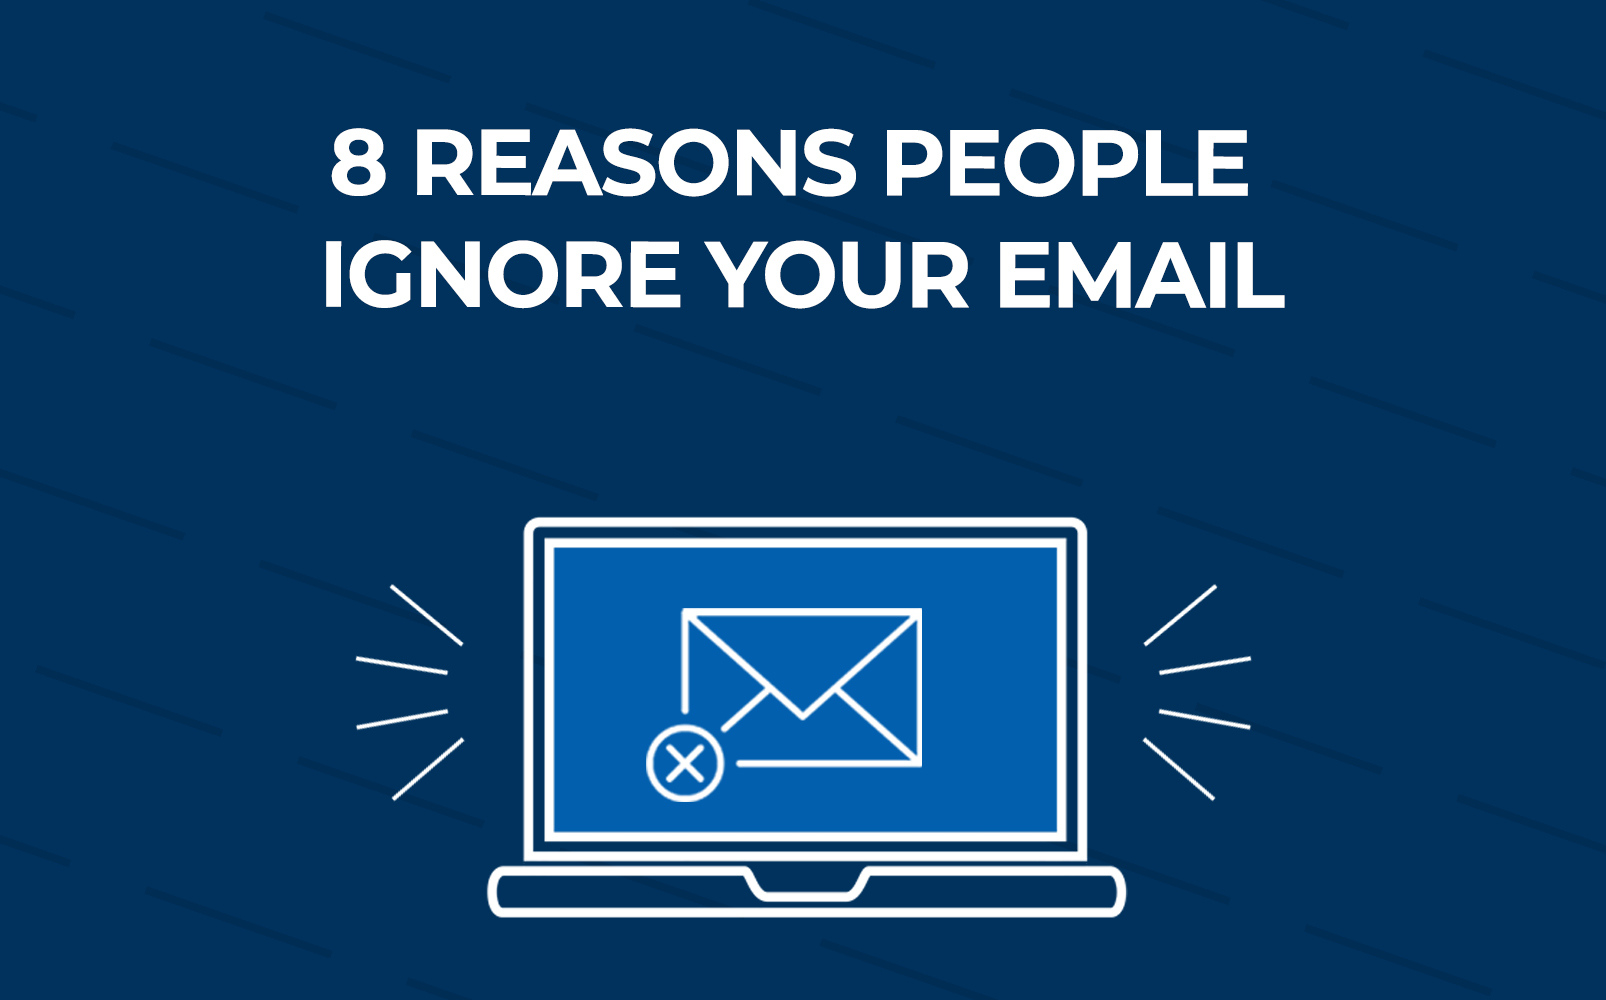 8 Reasons People Ignore Your Email